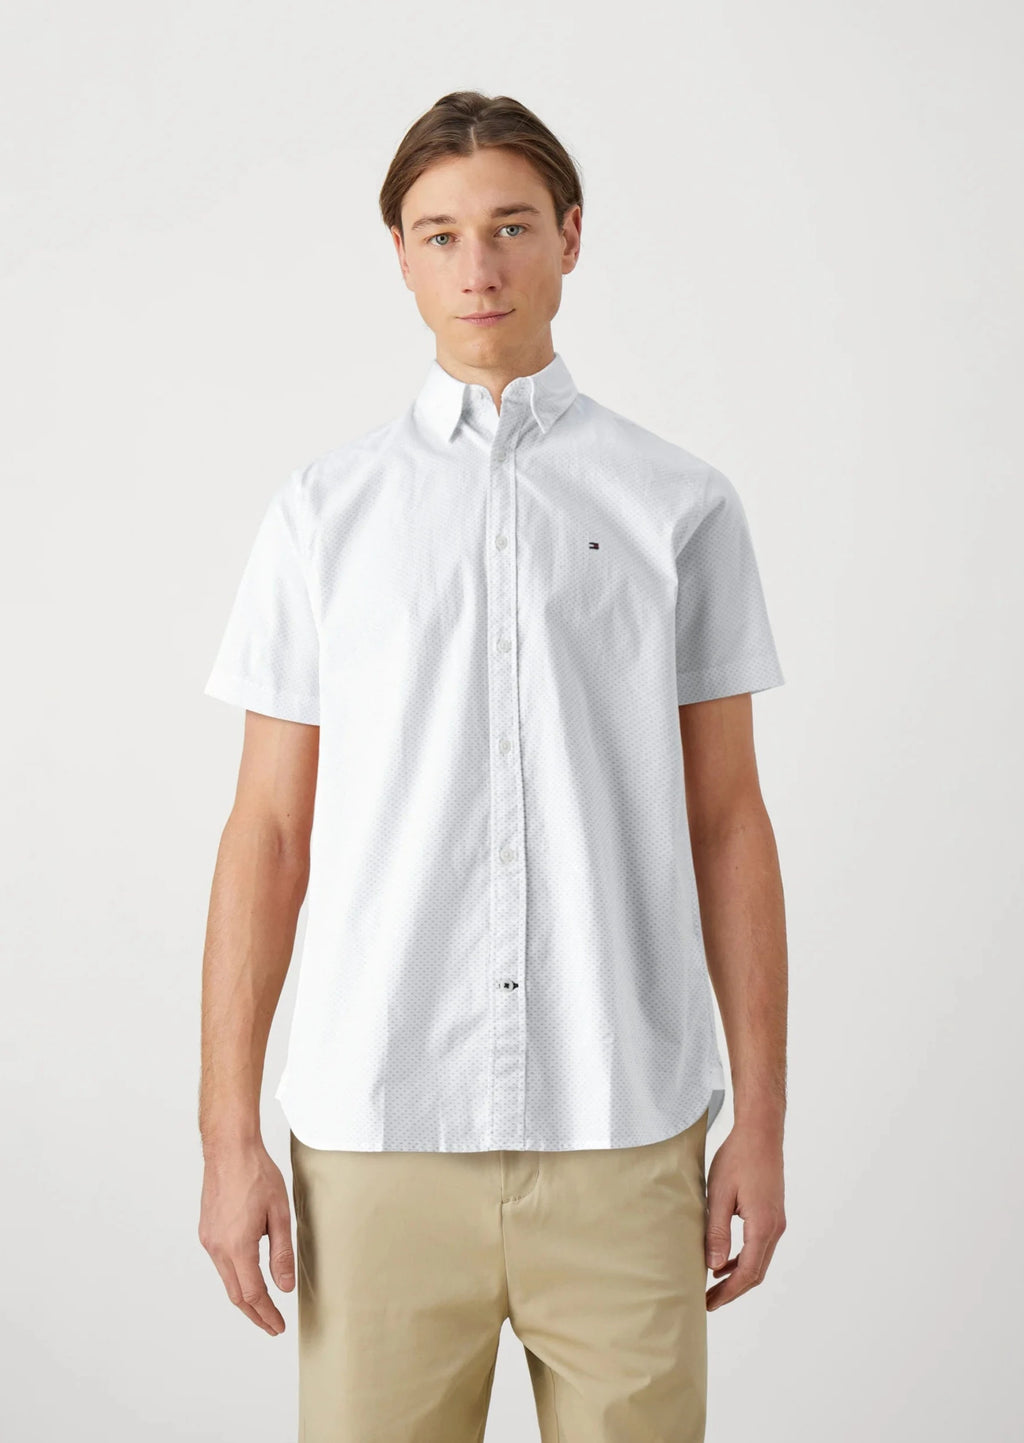 Chemise manches courtes Tommy Hilfiger blanche | Georgespaul